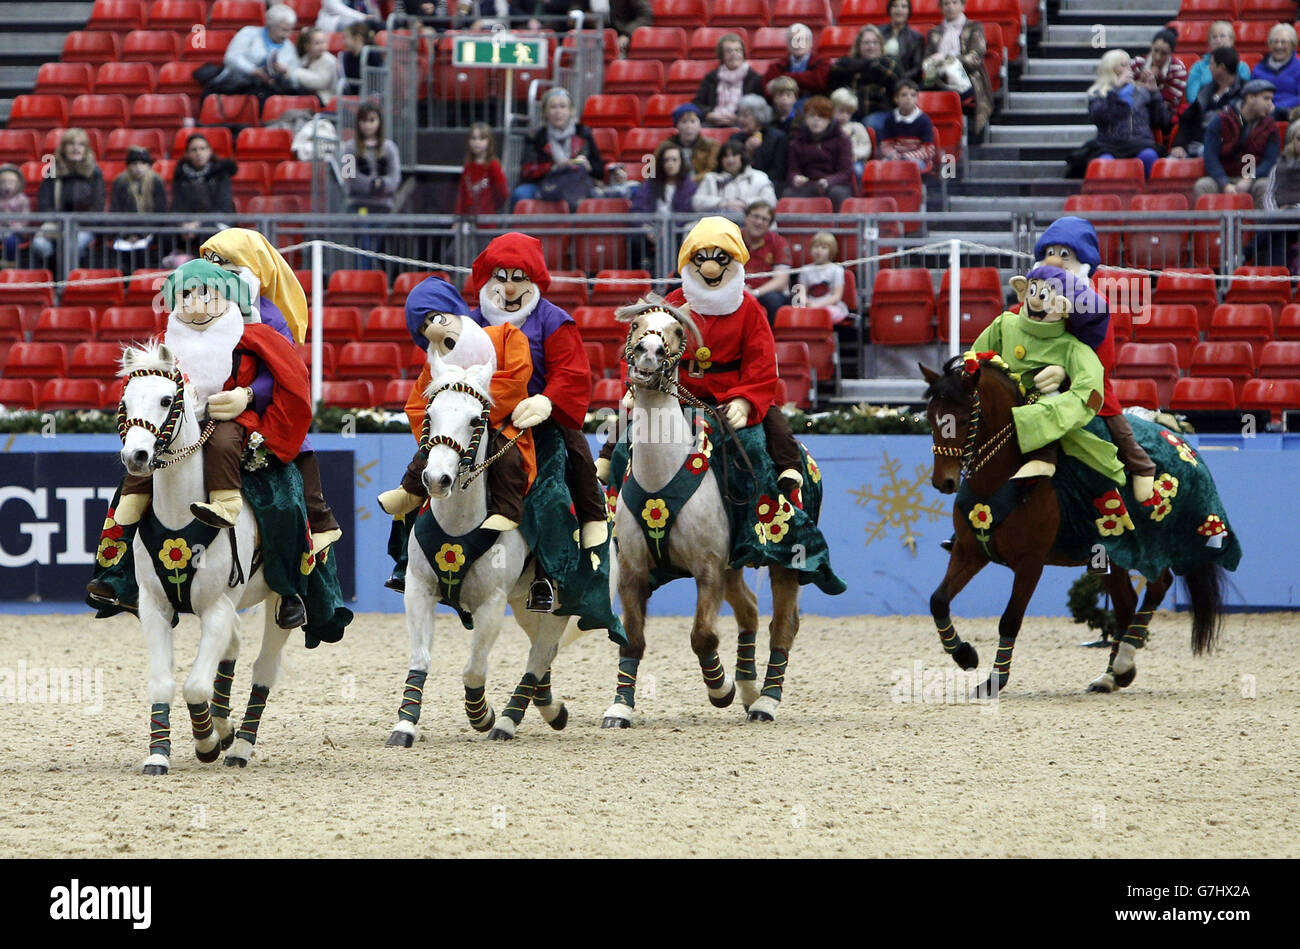 Members of the Saffron Walden & District Riding Club dress as the seven dwarves as they compete in the SEIB/British Riding Clubs Quadrille of the Year during day six of the Olympia London International Horse Show at the Olympia Exhibition Centre, London. Stock Photo